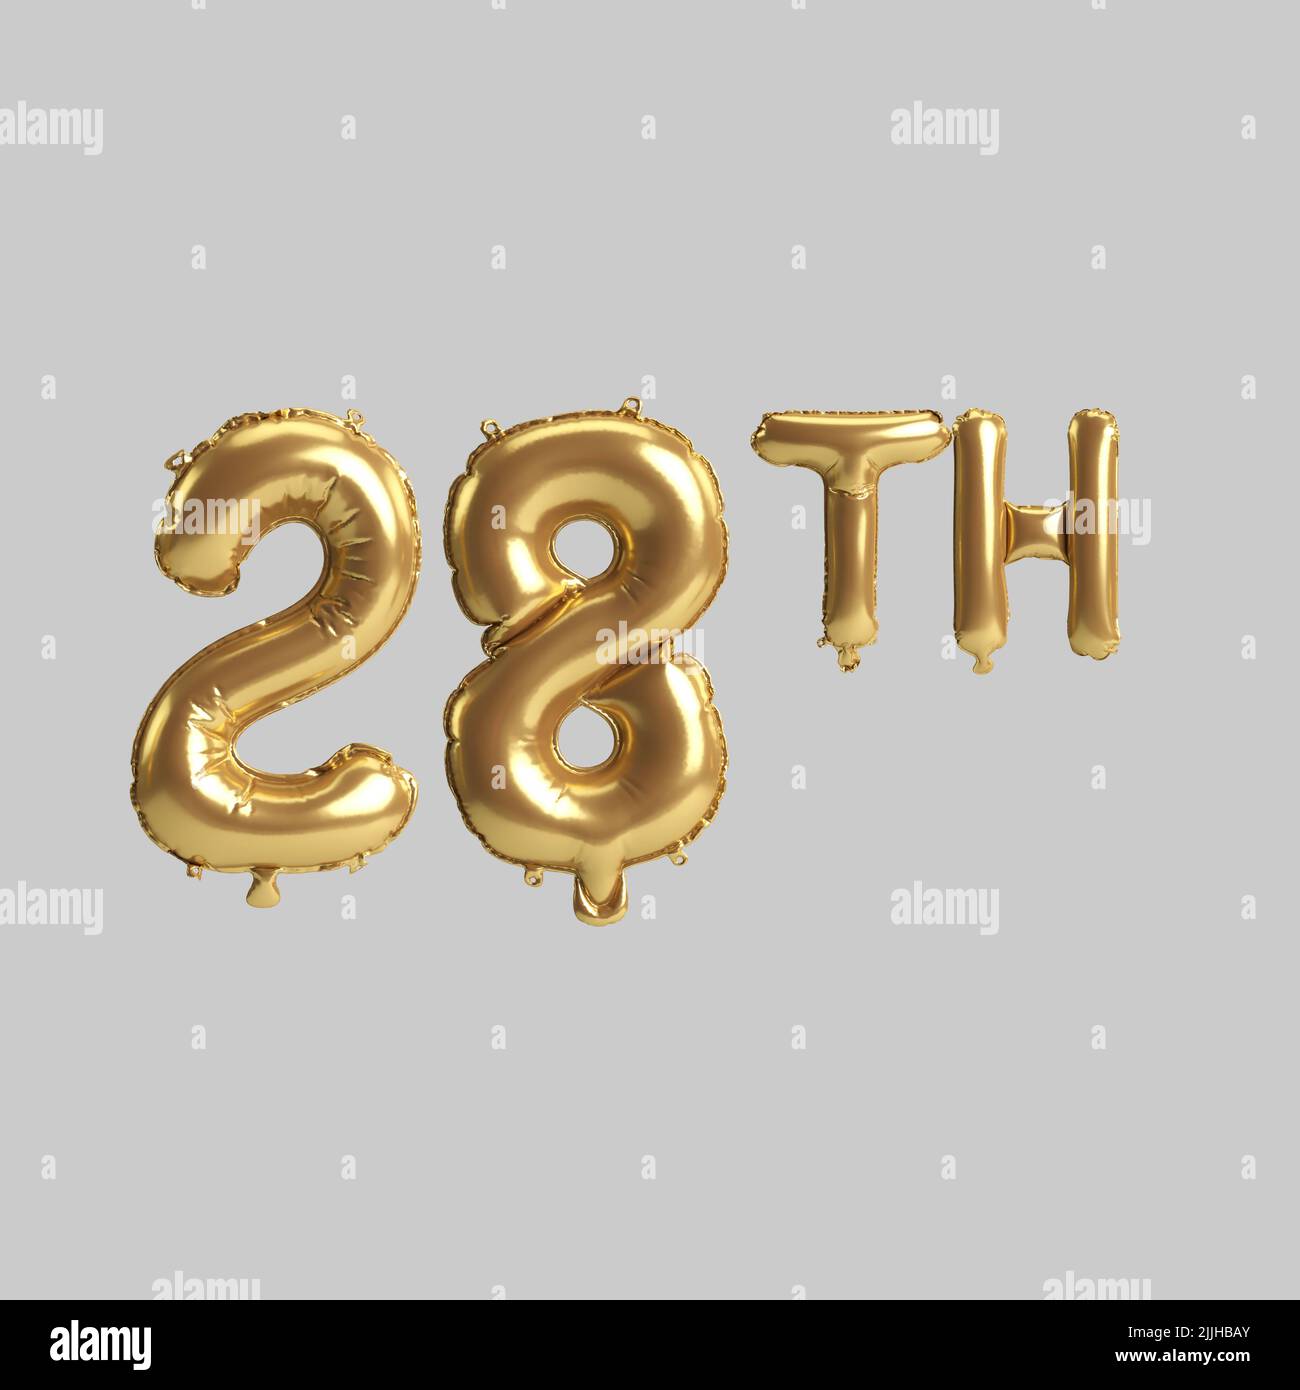 3d illustration of 28th gold balloons isolated on background Stock Photo